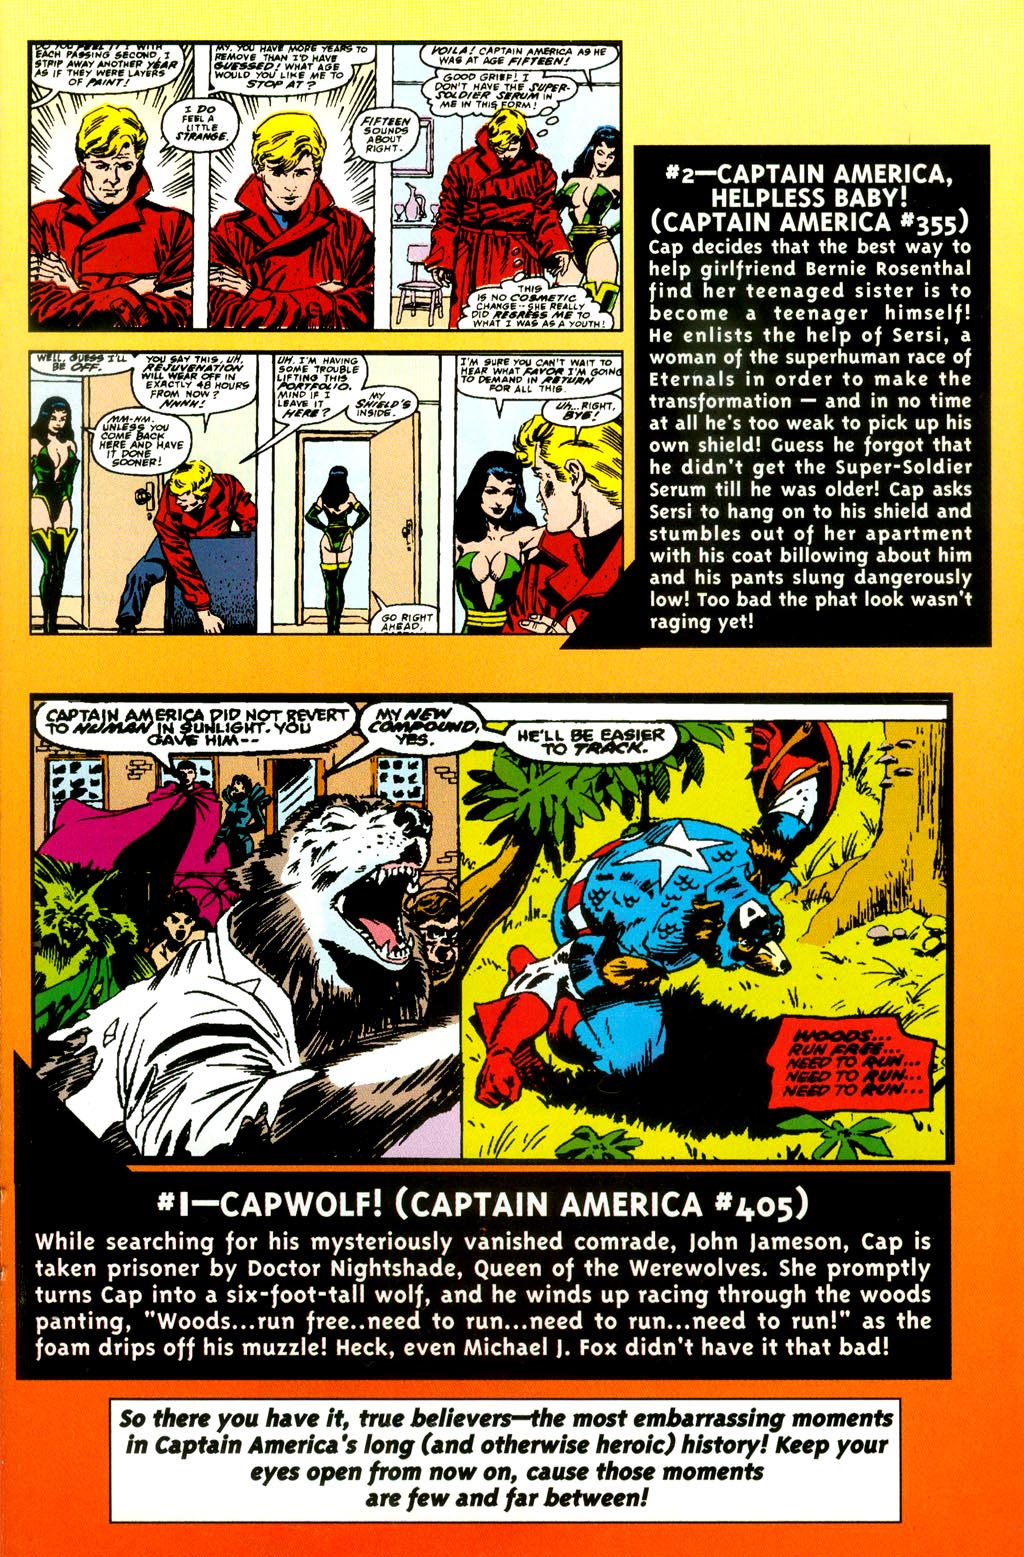 Captain America: The Legend Full Page 29